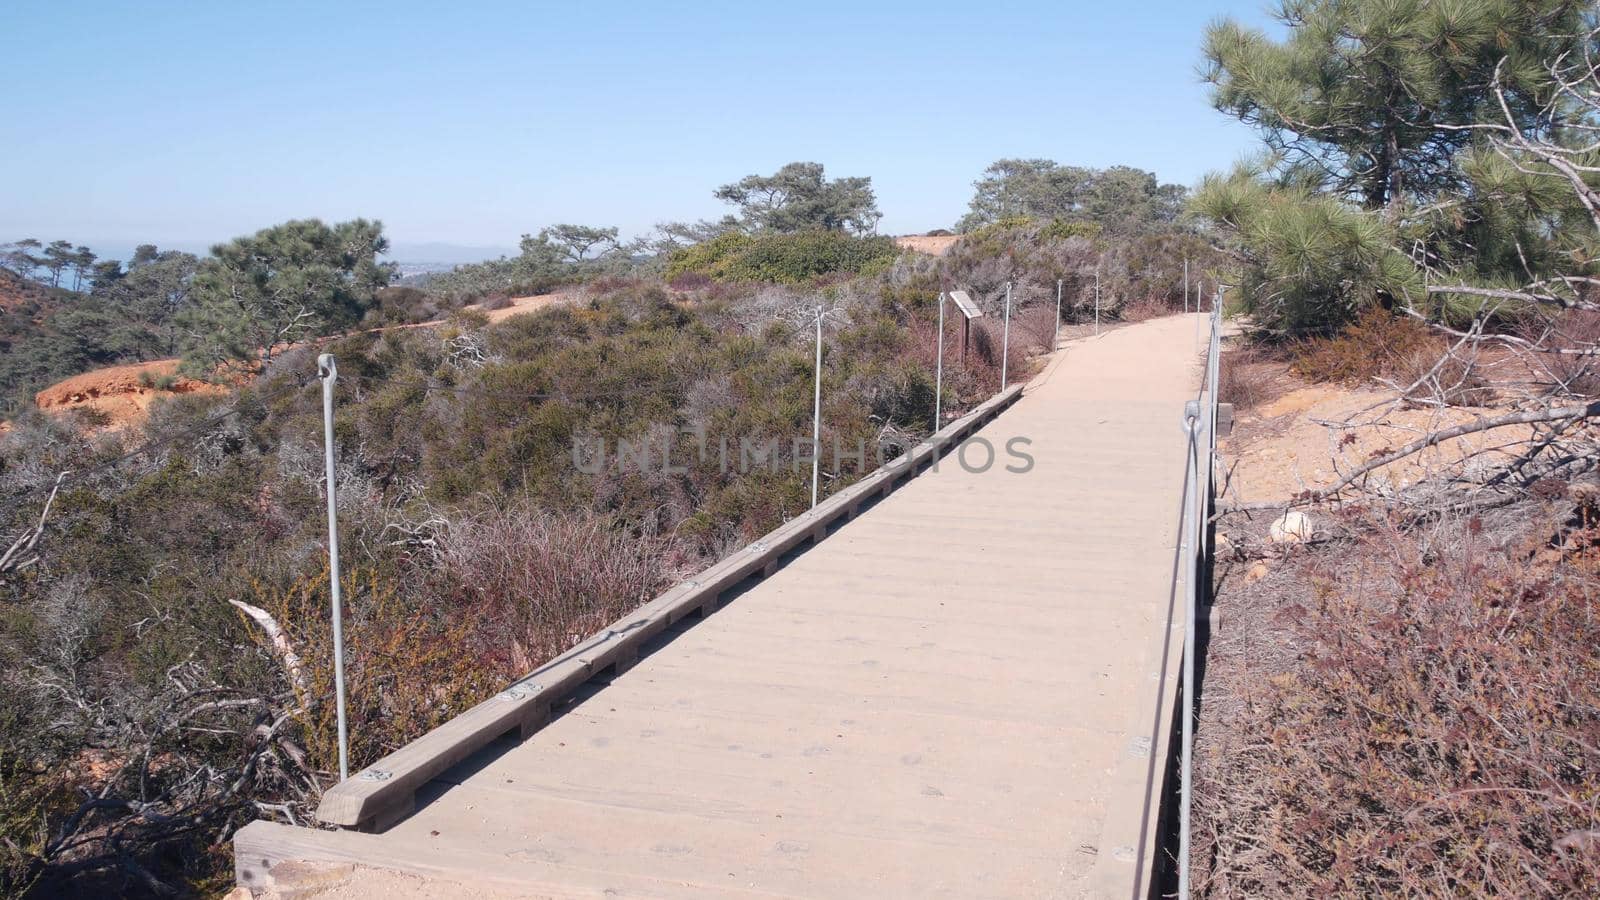 Torrey Pines state park, natural reserve for ecotourism, trekking and trails hiking, coastal California, USA. Environmental conservation, wilderness near San Diego. Designated footpath for eco tourism